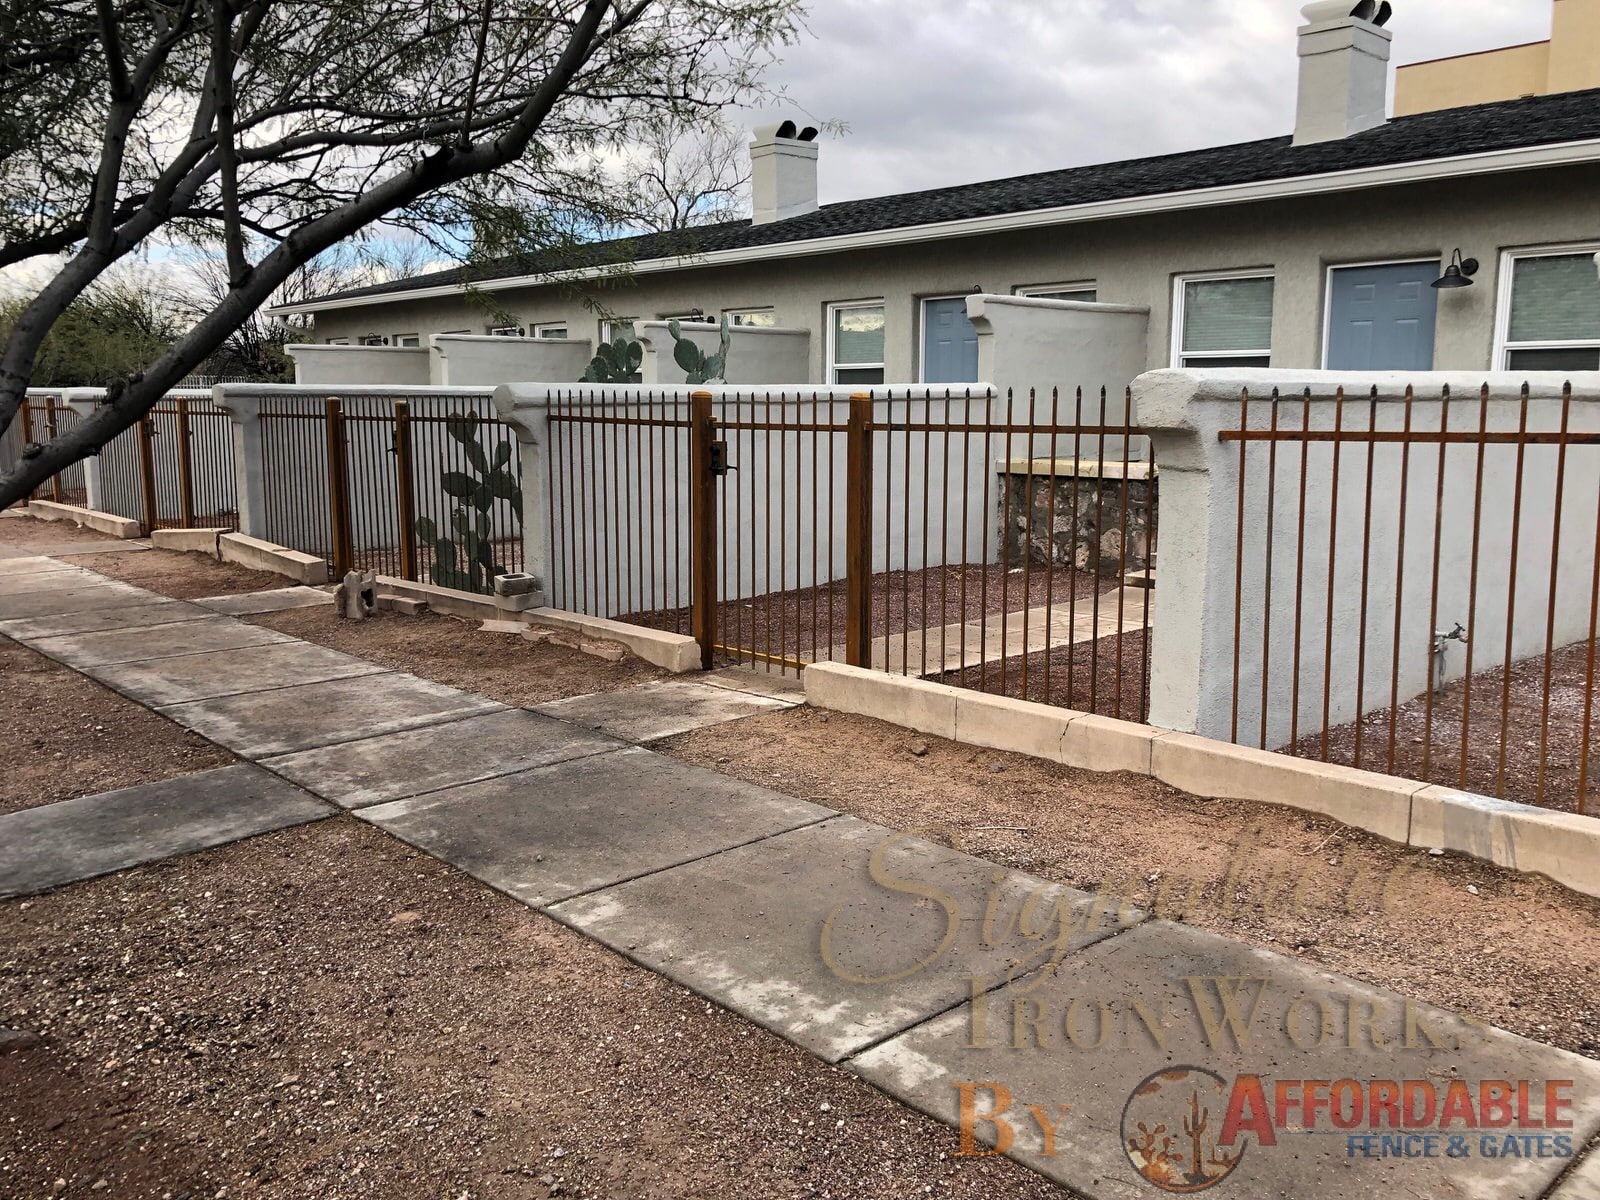 Wrought iron fence with rust patina 2145 - View fence and gates - New housing development